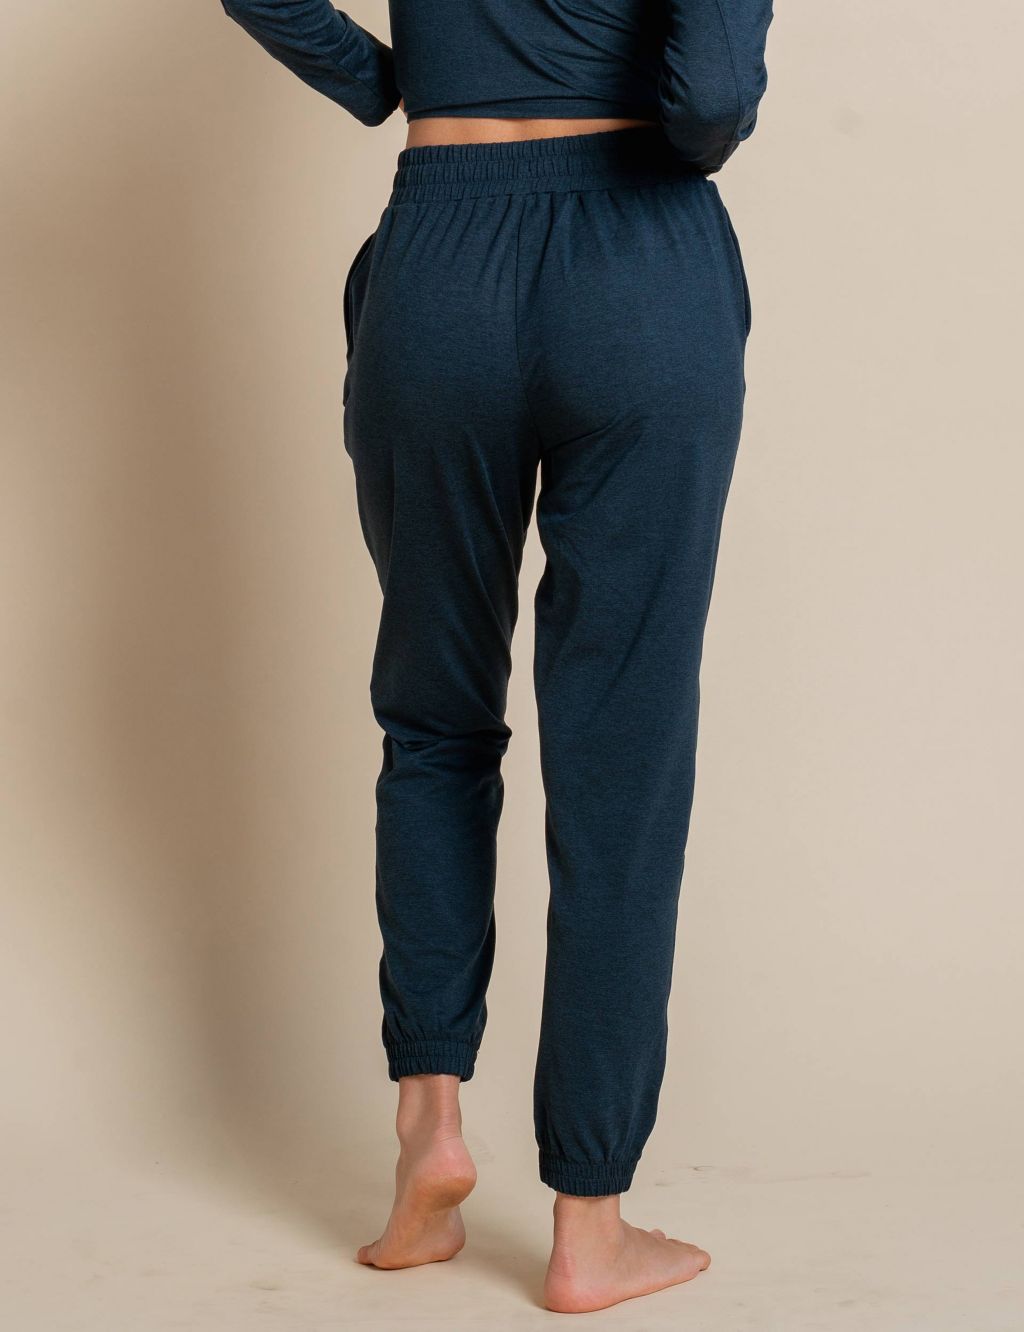 Reset Cuffed Joggers image 4